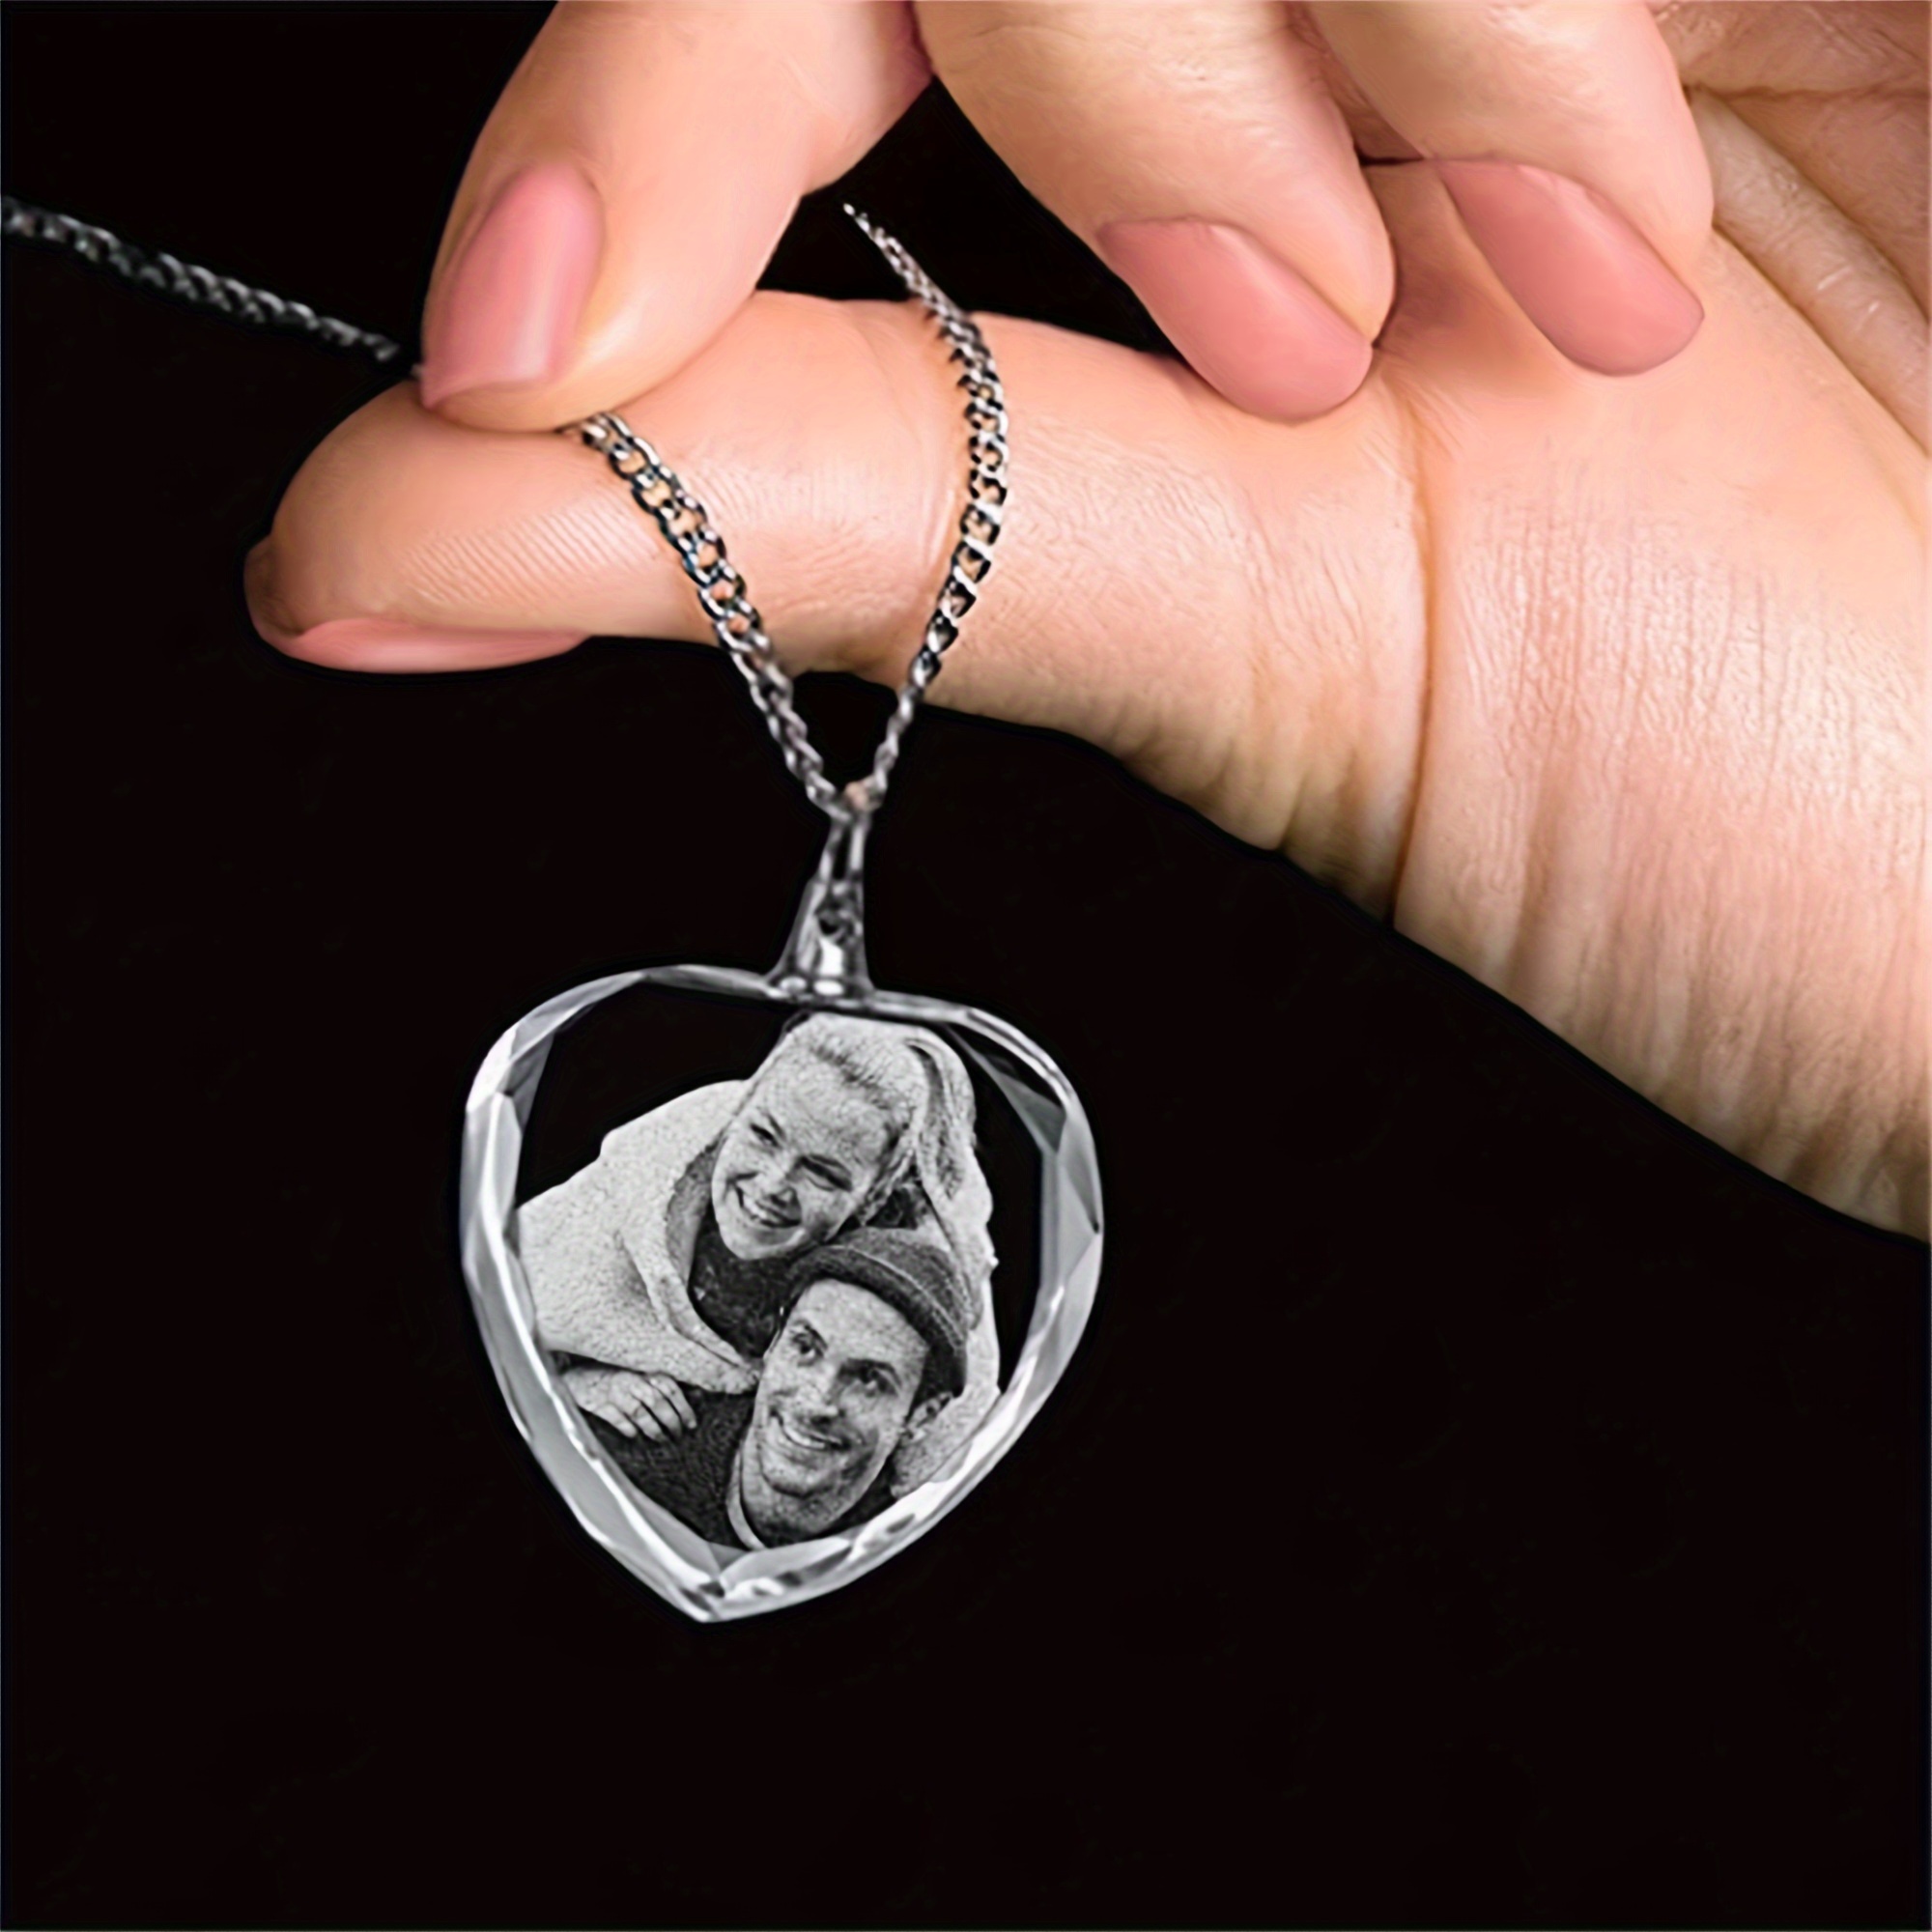 

Custom Photo Pendant Necklace, Personalized Picture Heart Charm, Fashion Crystal No Plating Jewelry, Ideal Gift For Graduation, Birthday, Loved Ones - Available In Various Sizes